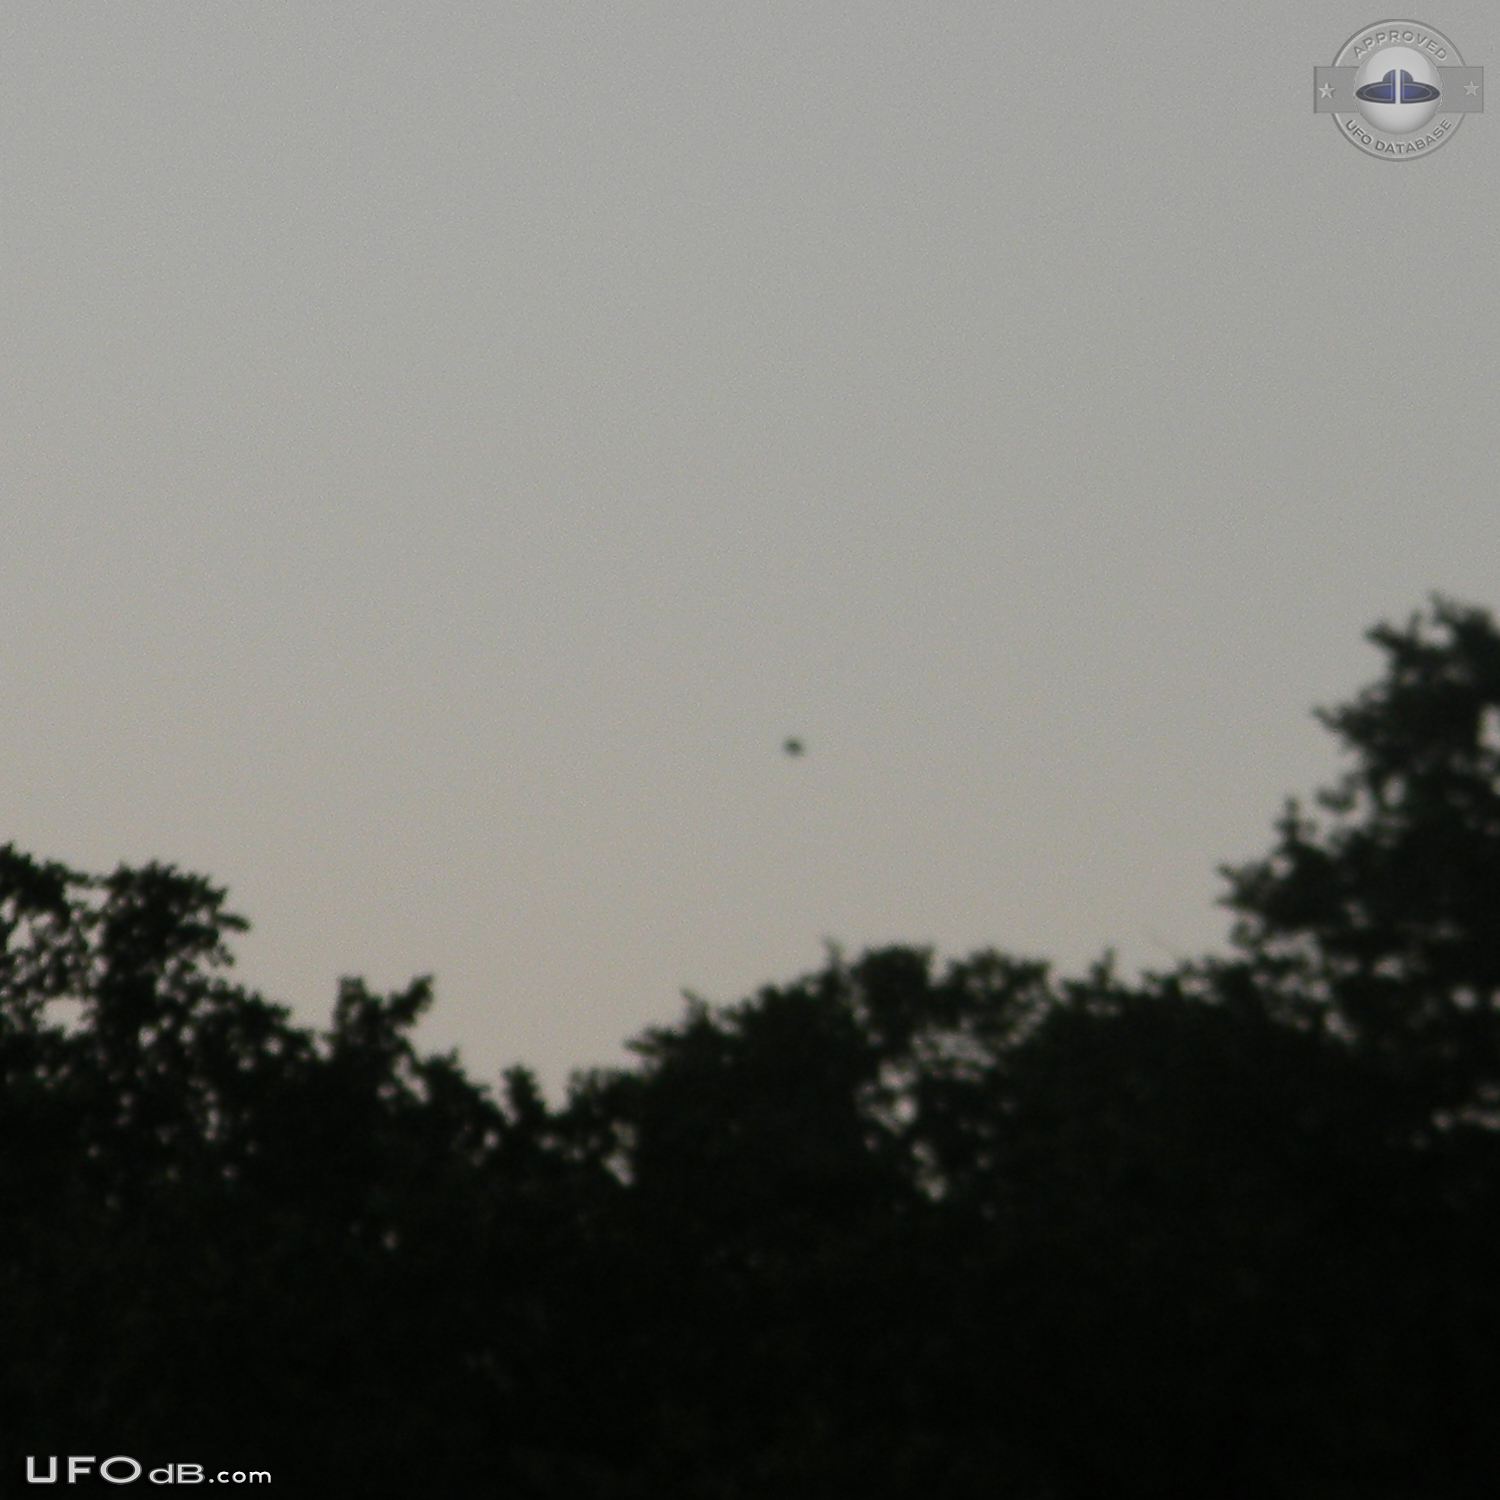 UFO hovered over Lake Lewisville in Texas and extended appendage 2014 UFO Picture #570-1